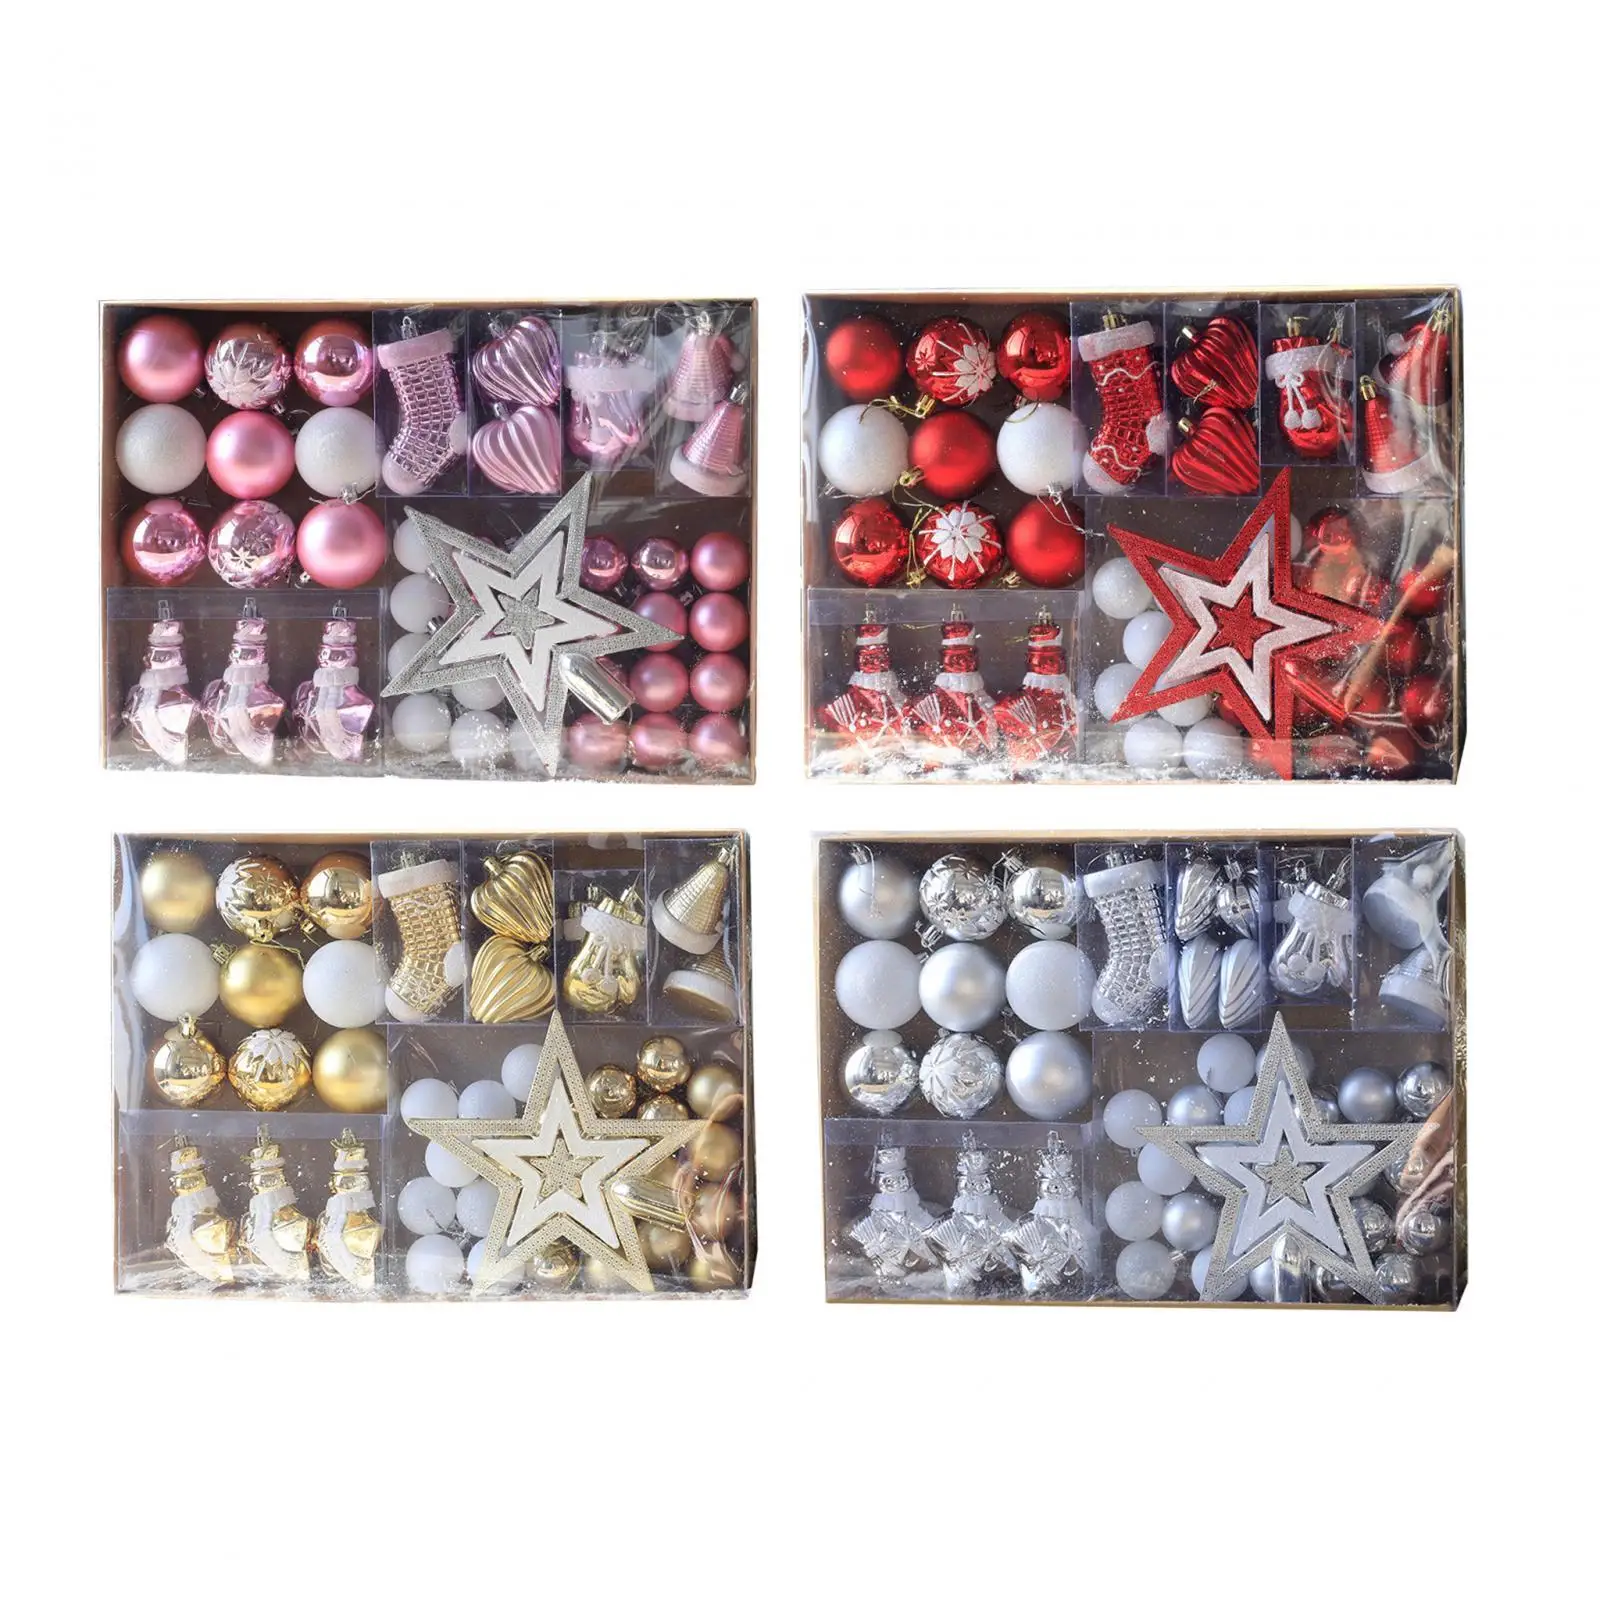 47 Pieces Christmas Tree Ornaments Set Xmas Decoration for Bedsides or Bags